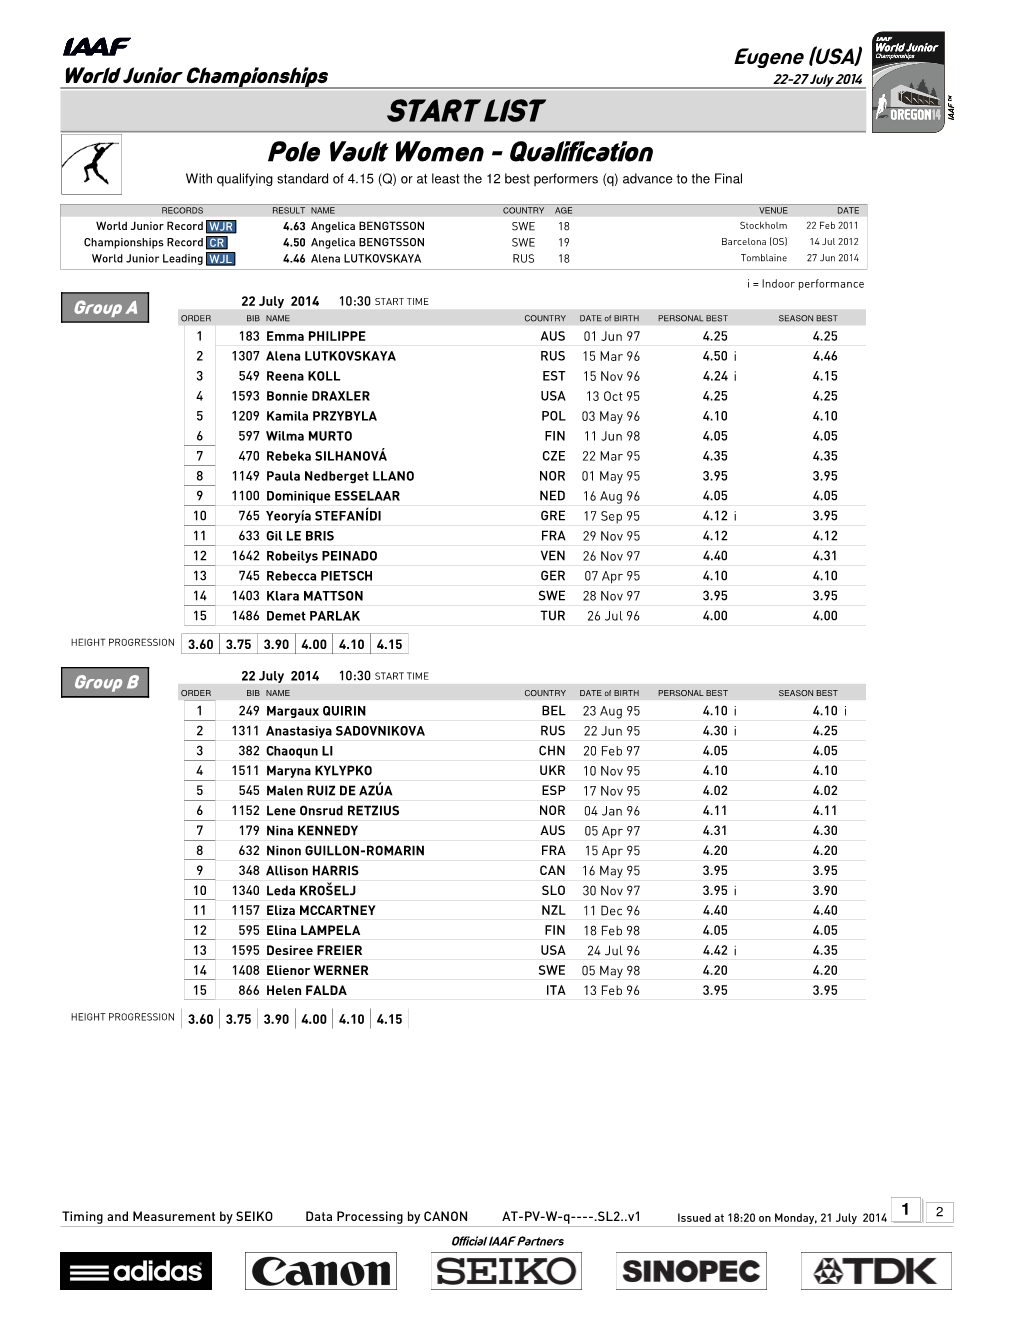 START LIST Pole Vault Women - Qualification with Qualifying Standard of 4.15 (Q) Or at Least the 12 Best Performers (Q) Advance to the Final